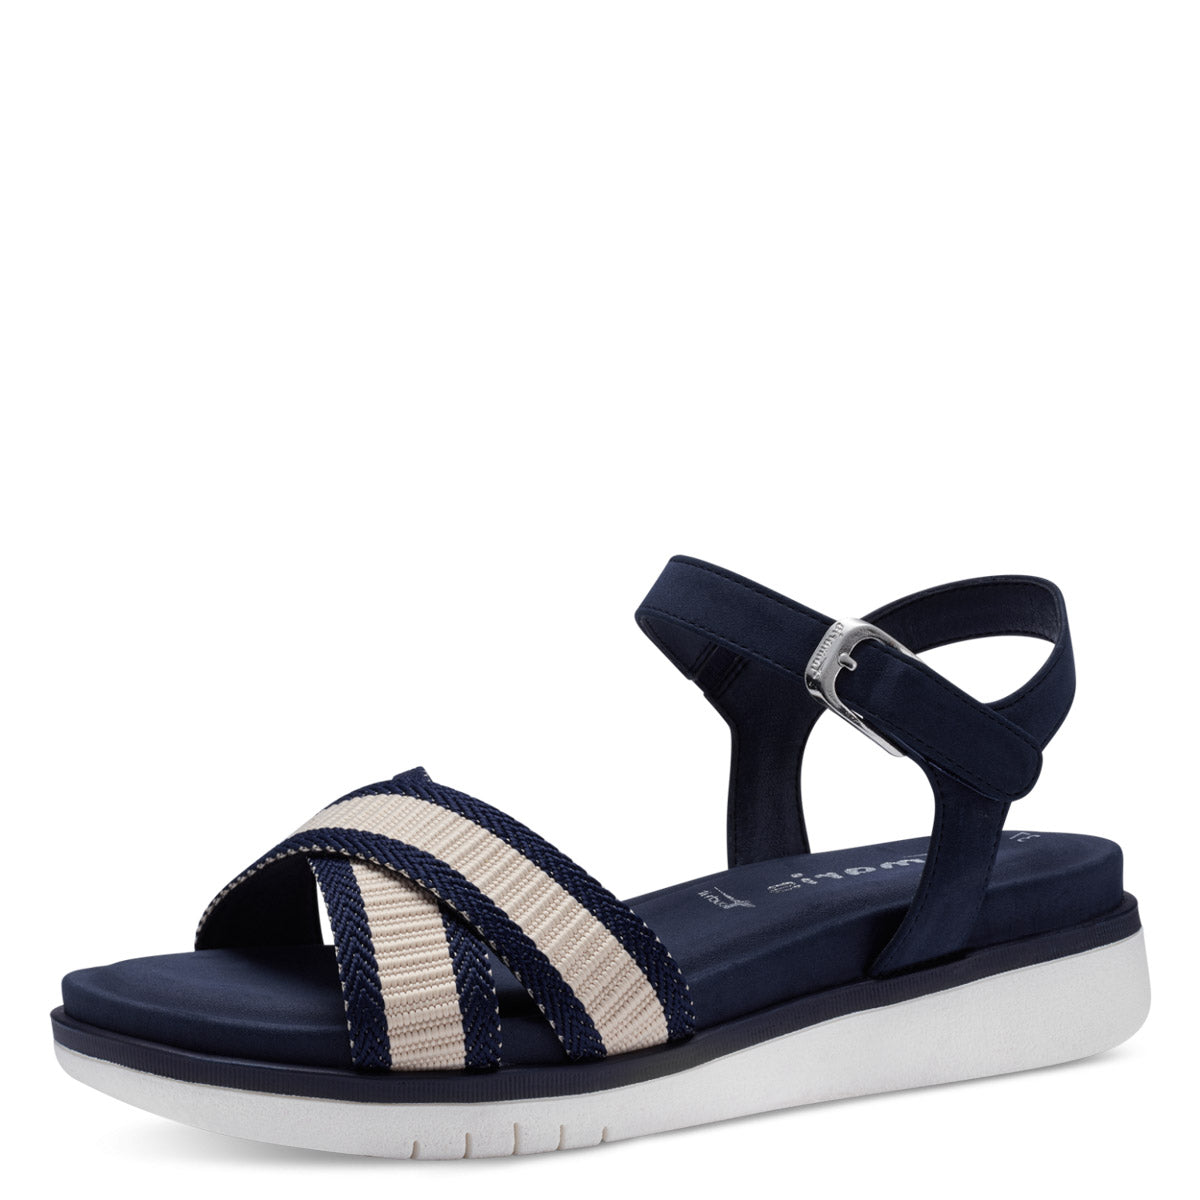 Polished and Refined Perfect Navy Flat Sandals for Summer